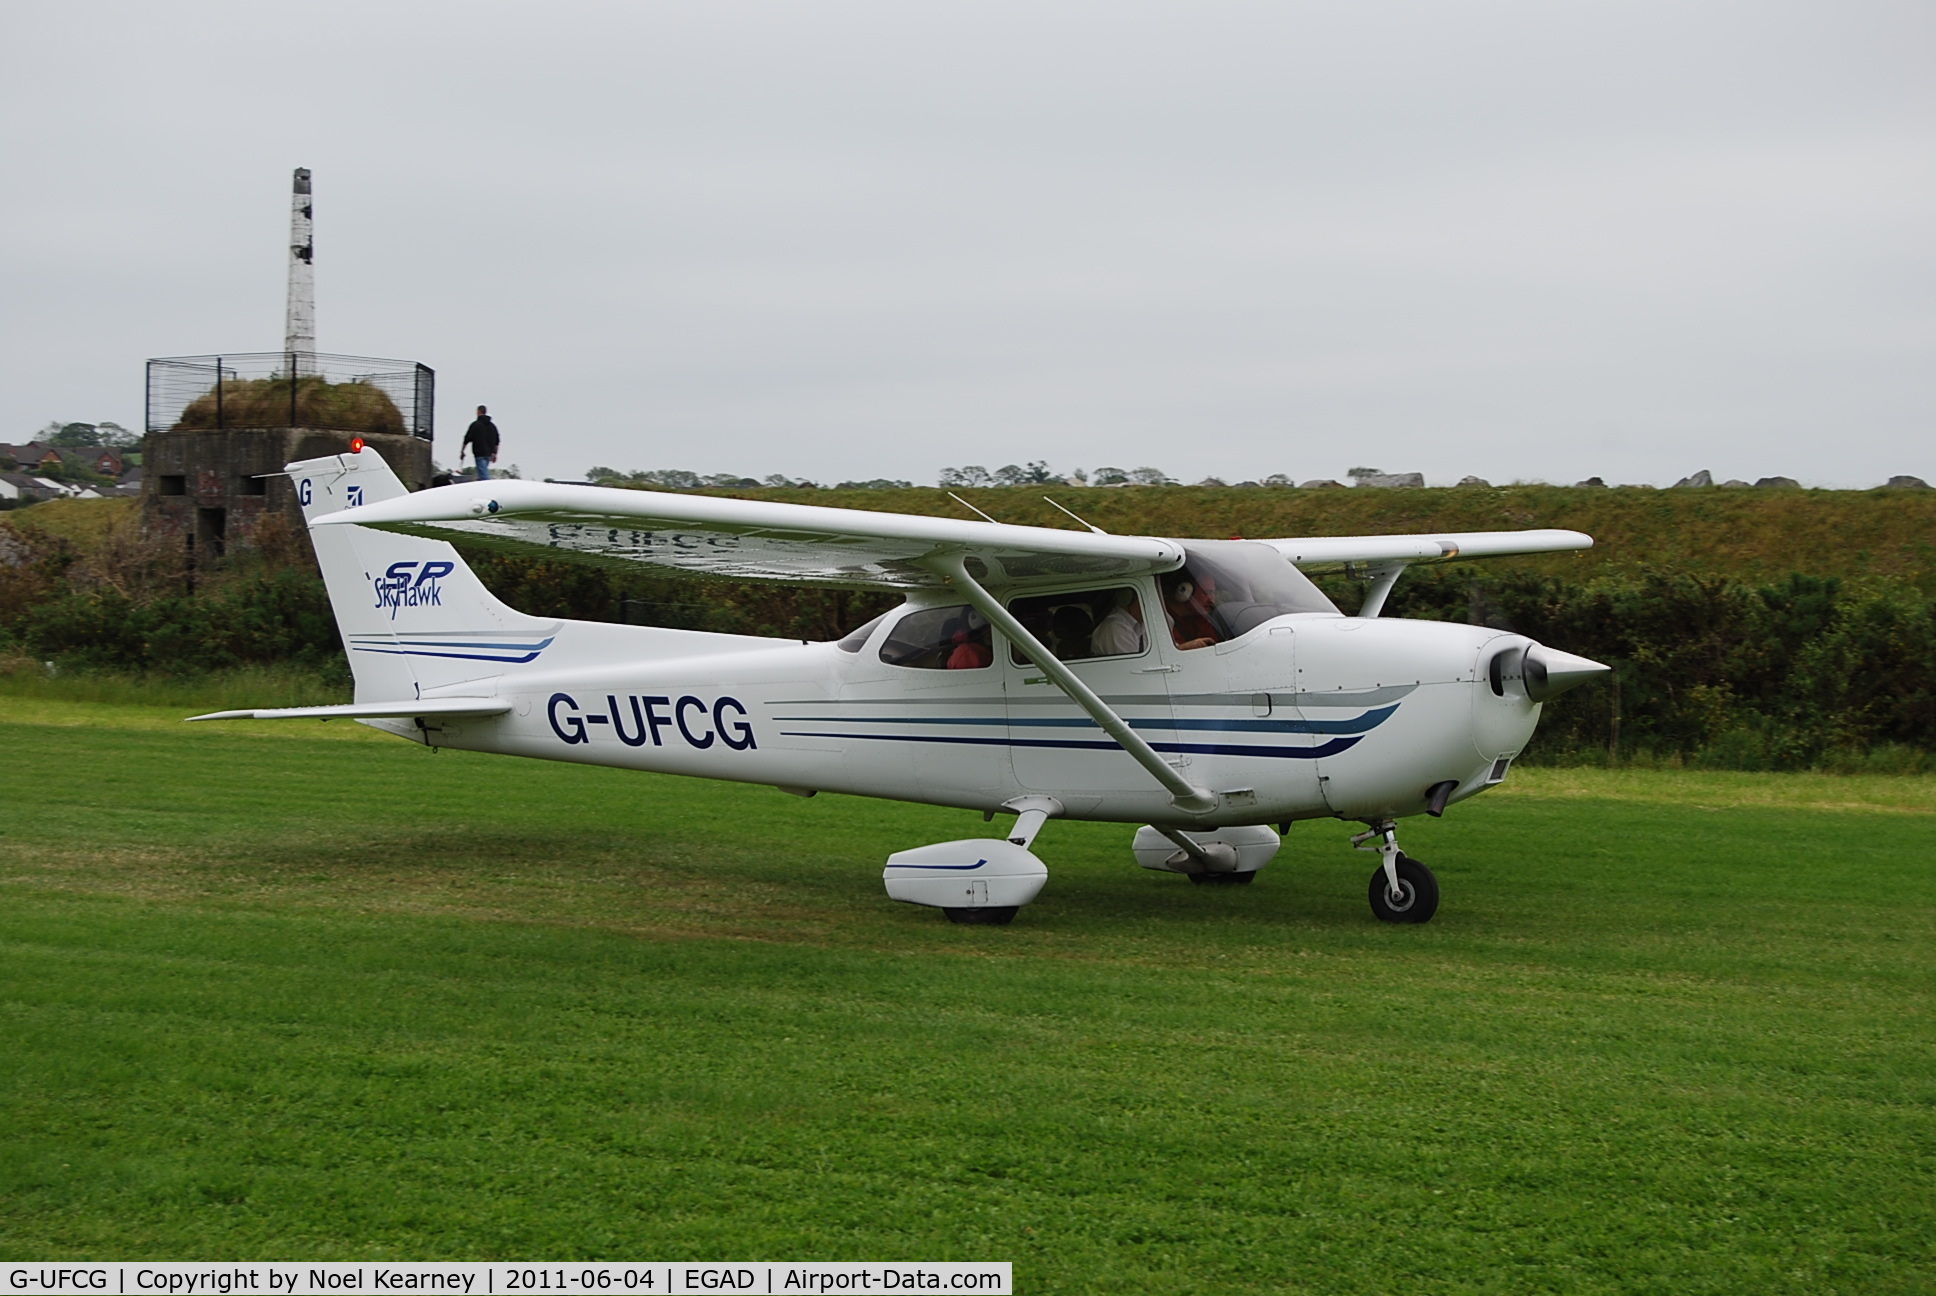 G-UFCG, 2003 Cessna 172S C/N 172S9450, Taxi-ing out to depart from the Newtownards Airfield 04-06-2011.